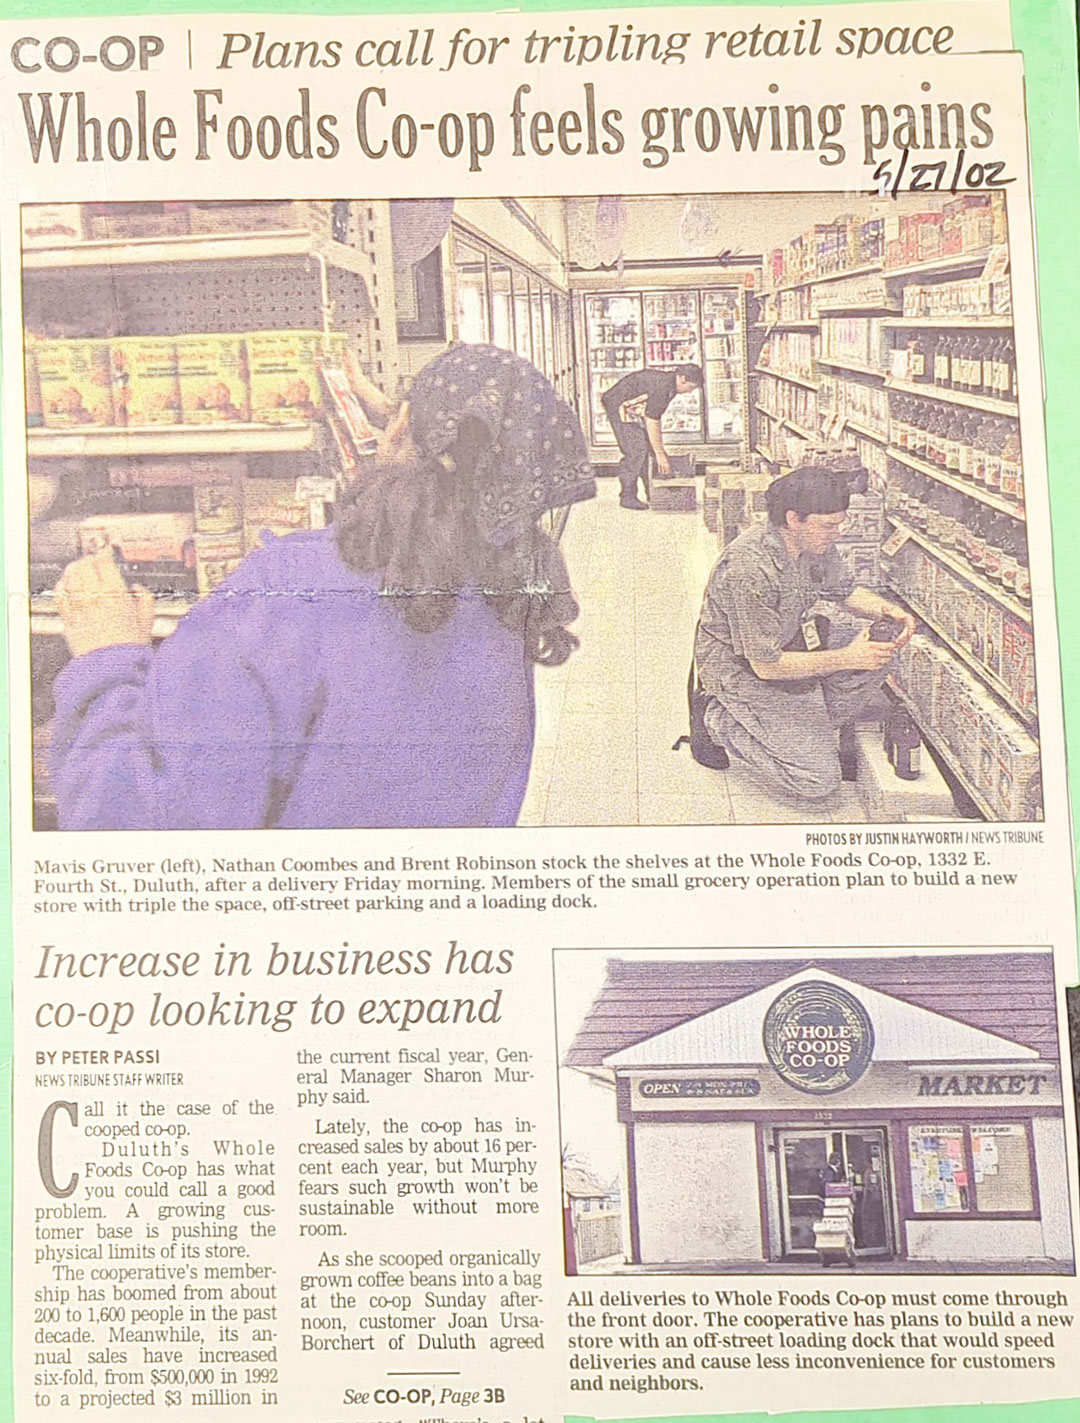 A newspaper article titled "Whole Foods Co-op feels growing pains" discusses the need to triple retail space due to increased business. A photo shows three employees stacking shelves at Whole Foods Coop Duluth MN, while another photo captures the store's exterior.